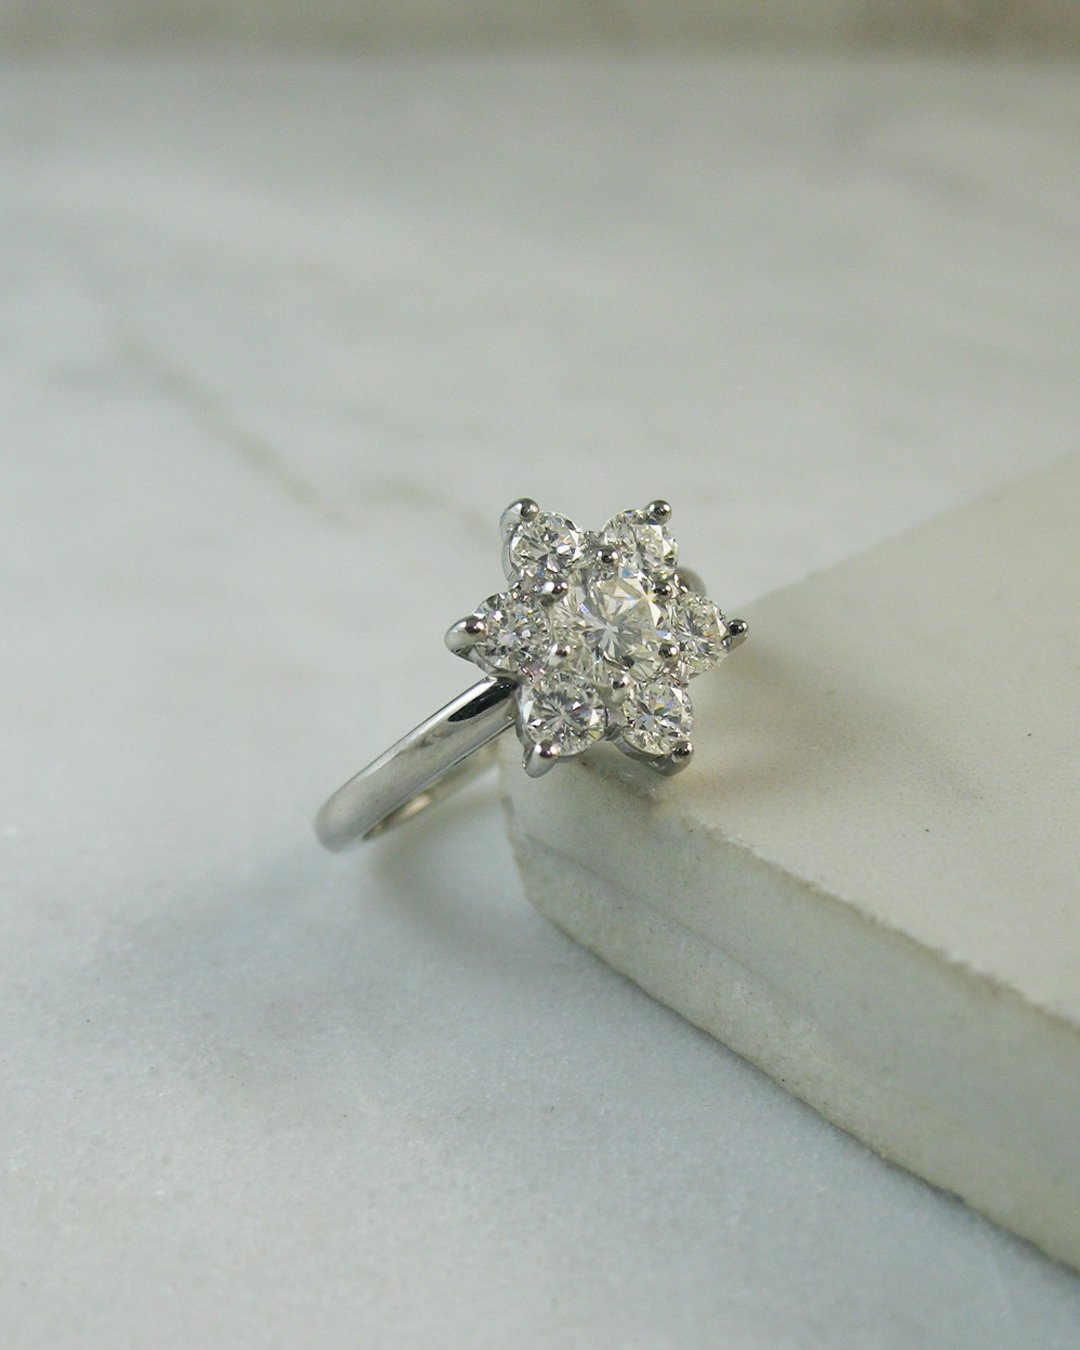 A beautiful floral shaped diamond cluster ring